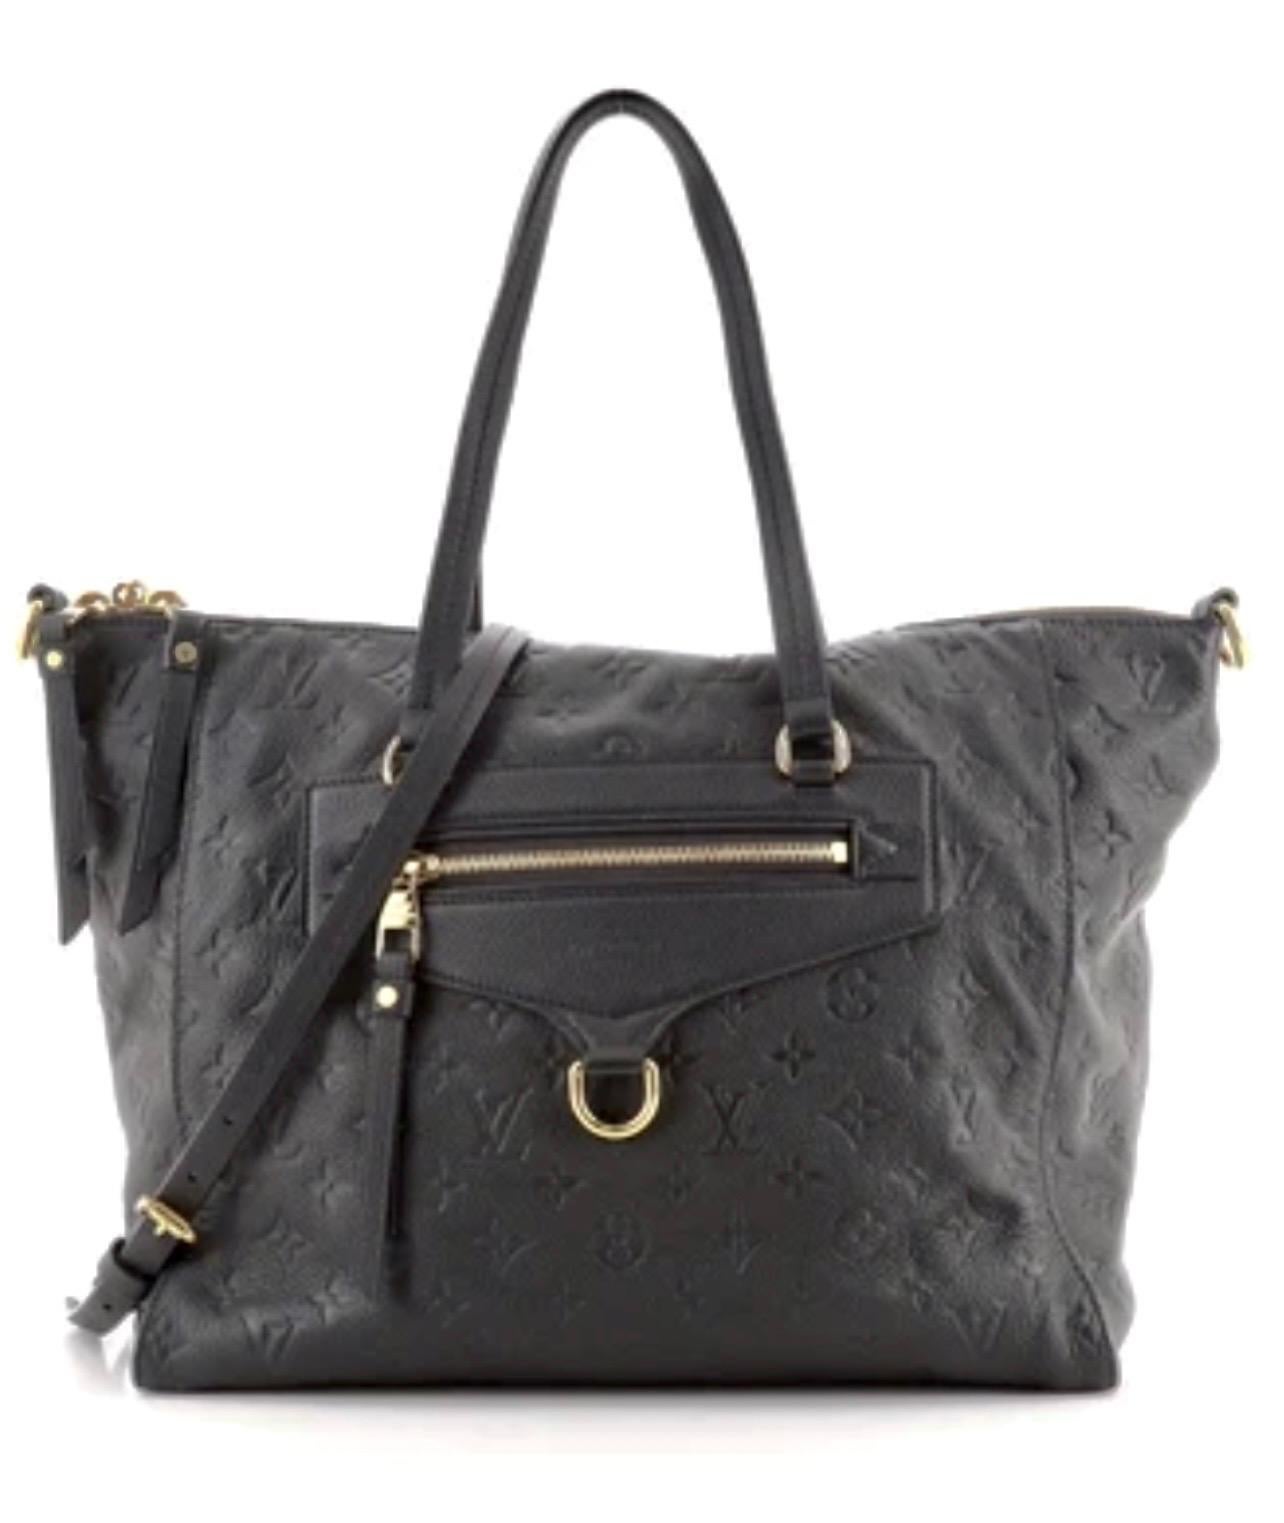 
Louis Vuitton Black Empreinte Leather Lumineuse PM Bag
We guarantee this is an authentic LOUIS VUITTON Empreinte Lumineuse PM or 100% of your money back. This stylish tote is crafted of Louis Vuitton monogram embossed leather in dark blue and